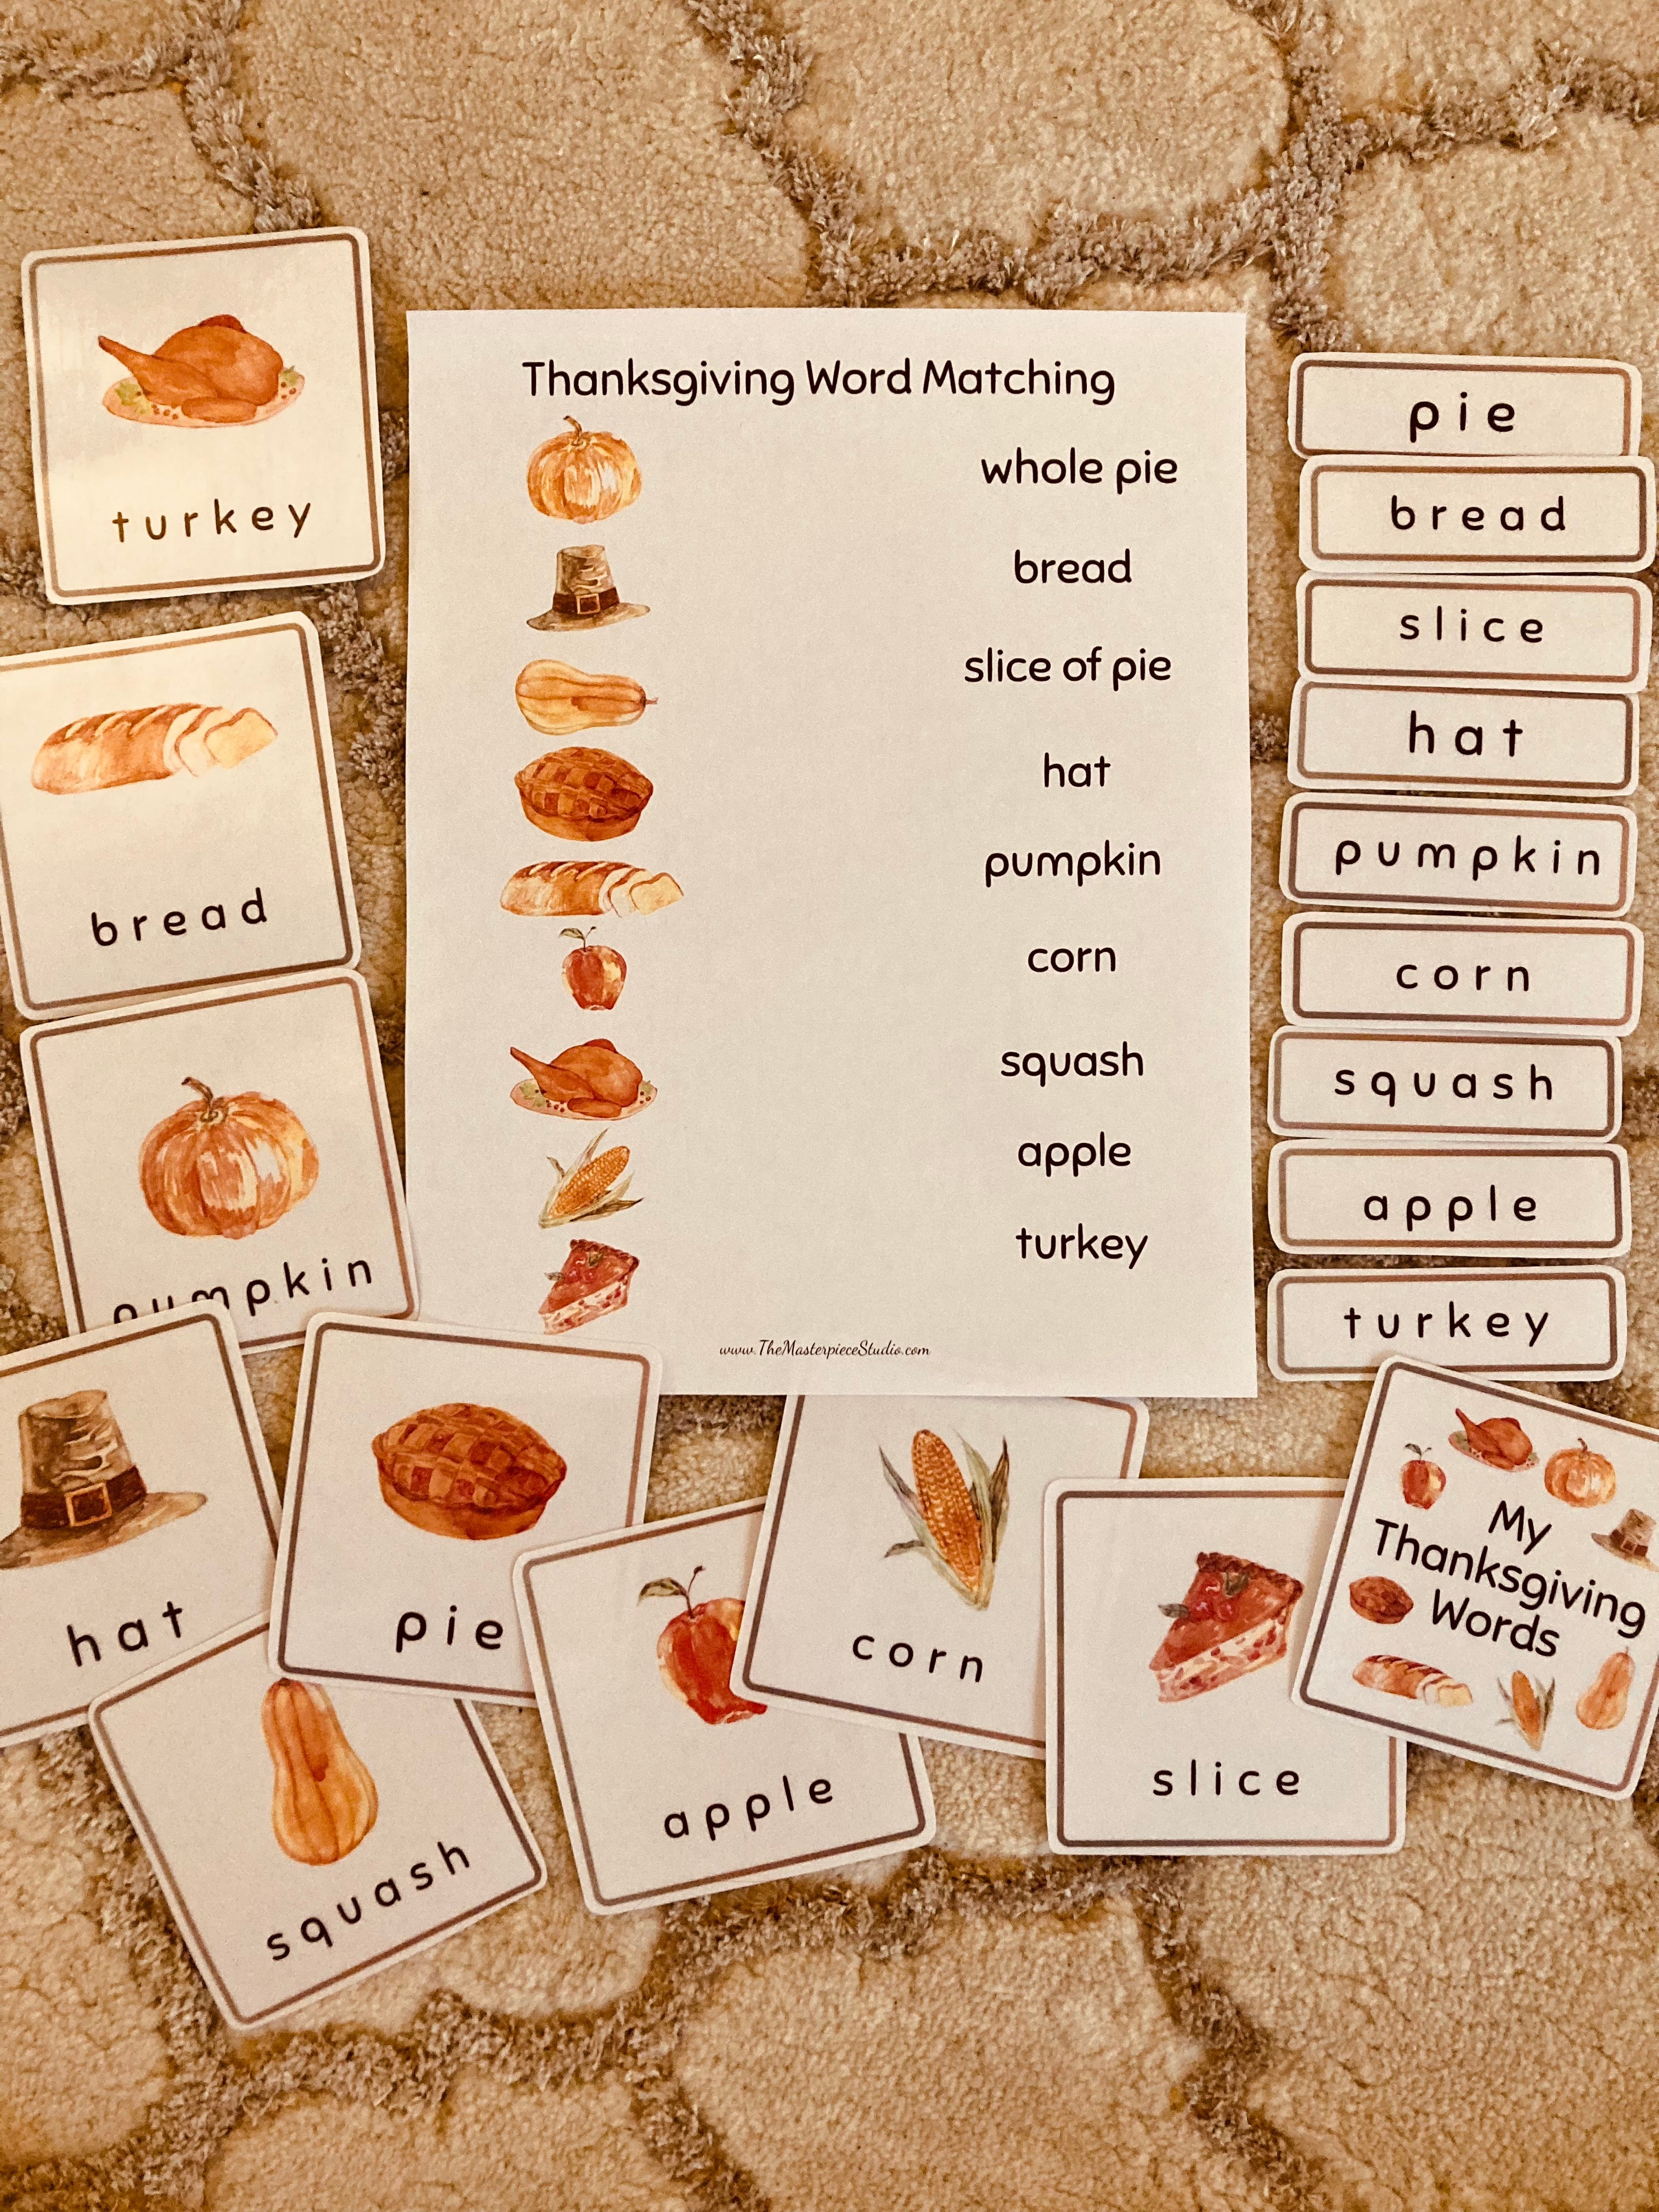 Thanksgiving Vocabulary Pack